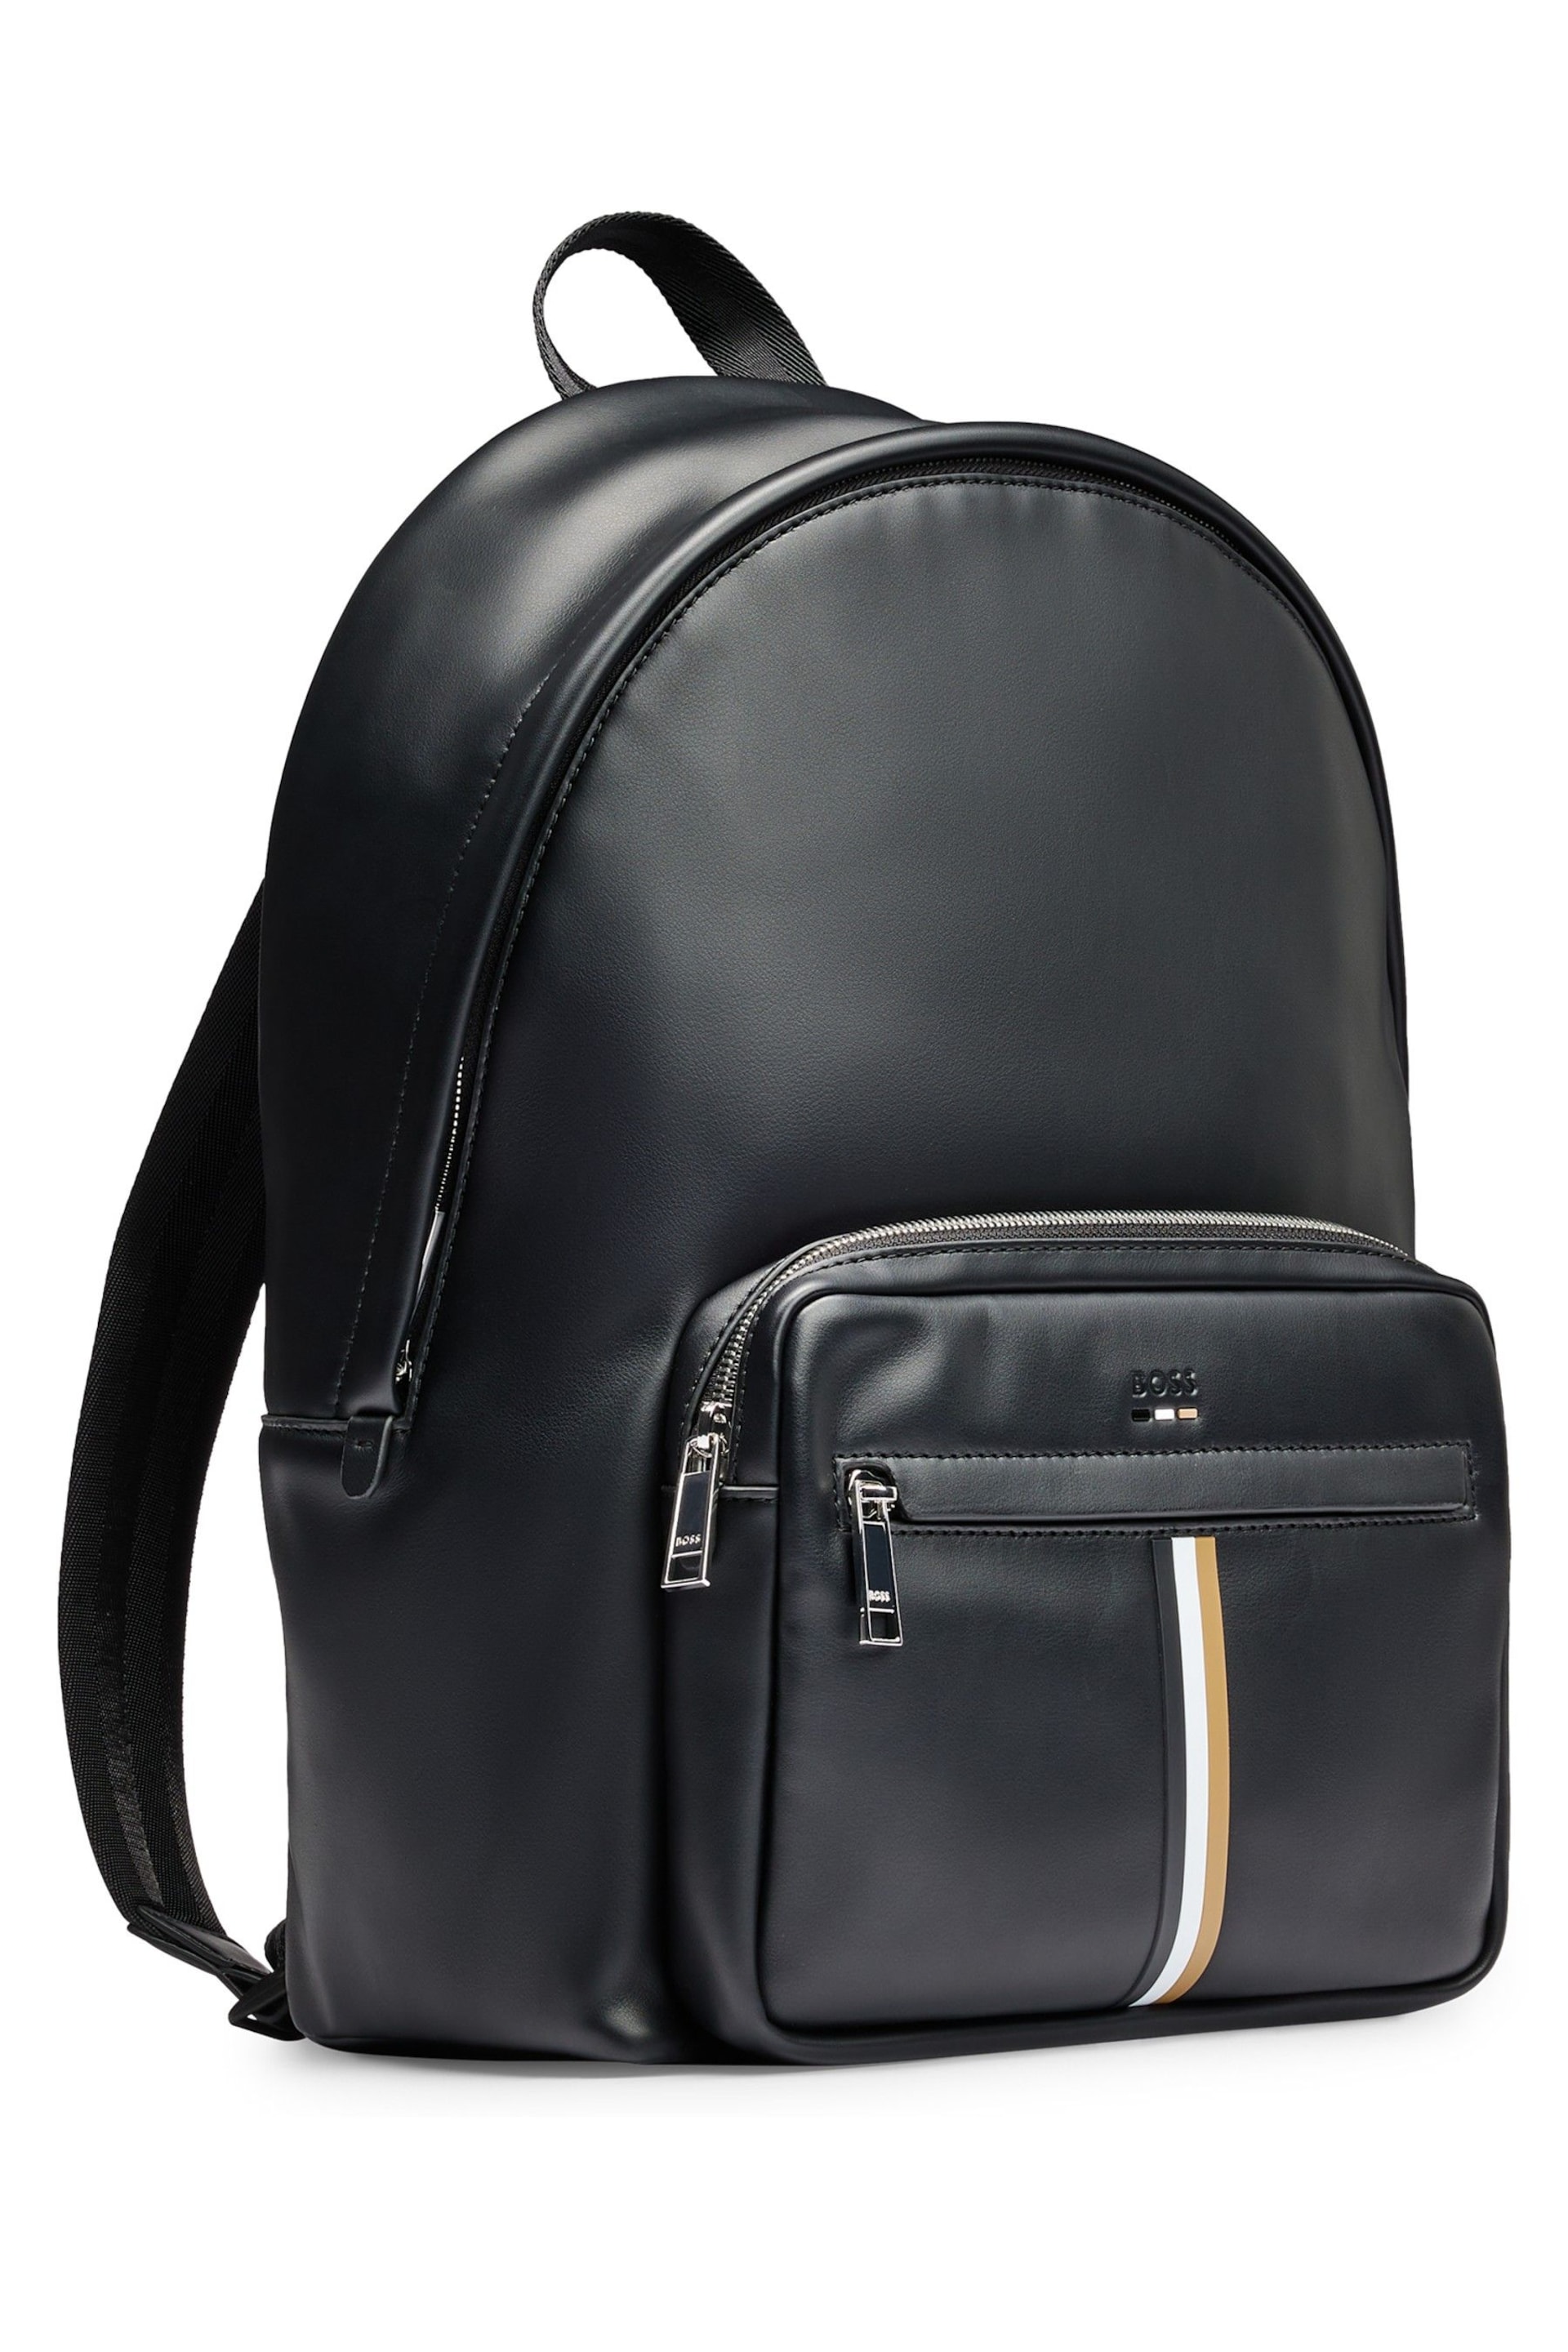 BOSS Black Signature Stripe Faux Leather Backpack - Image 4 of 4